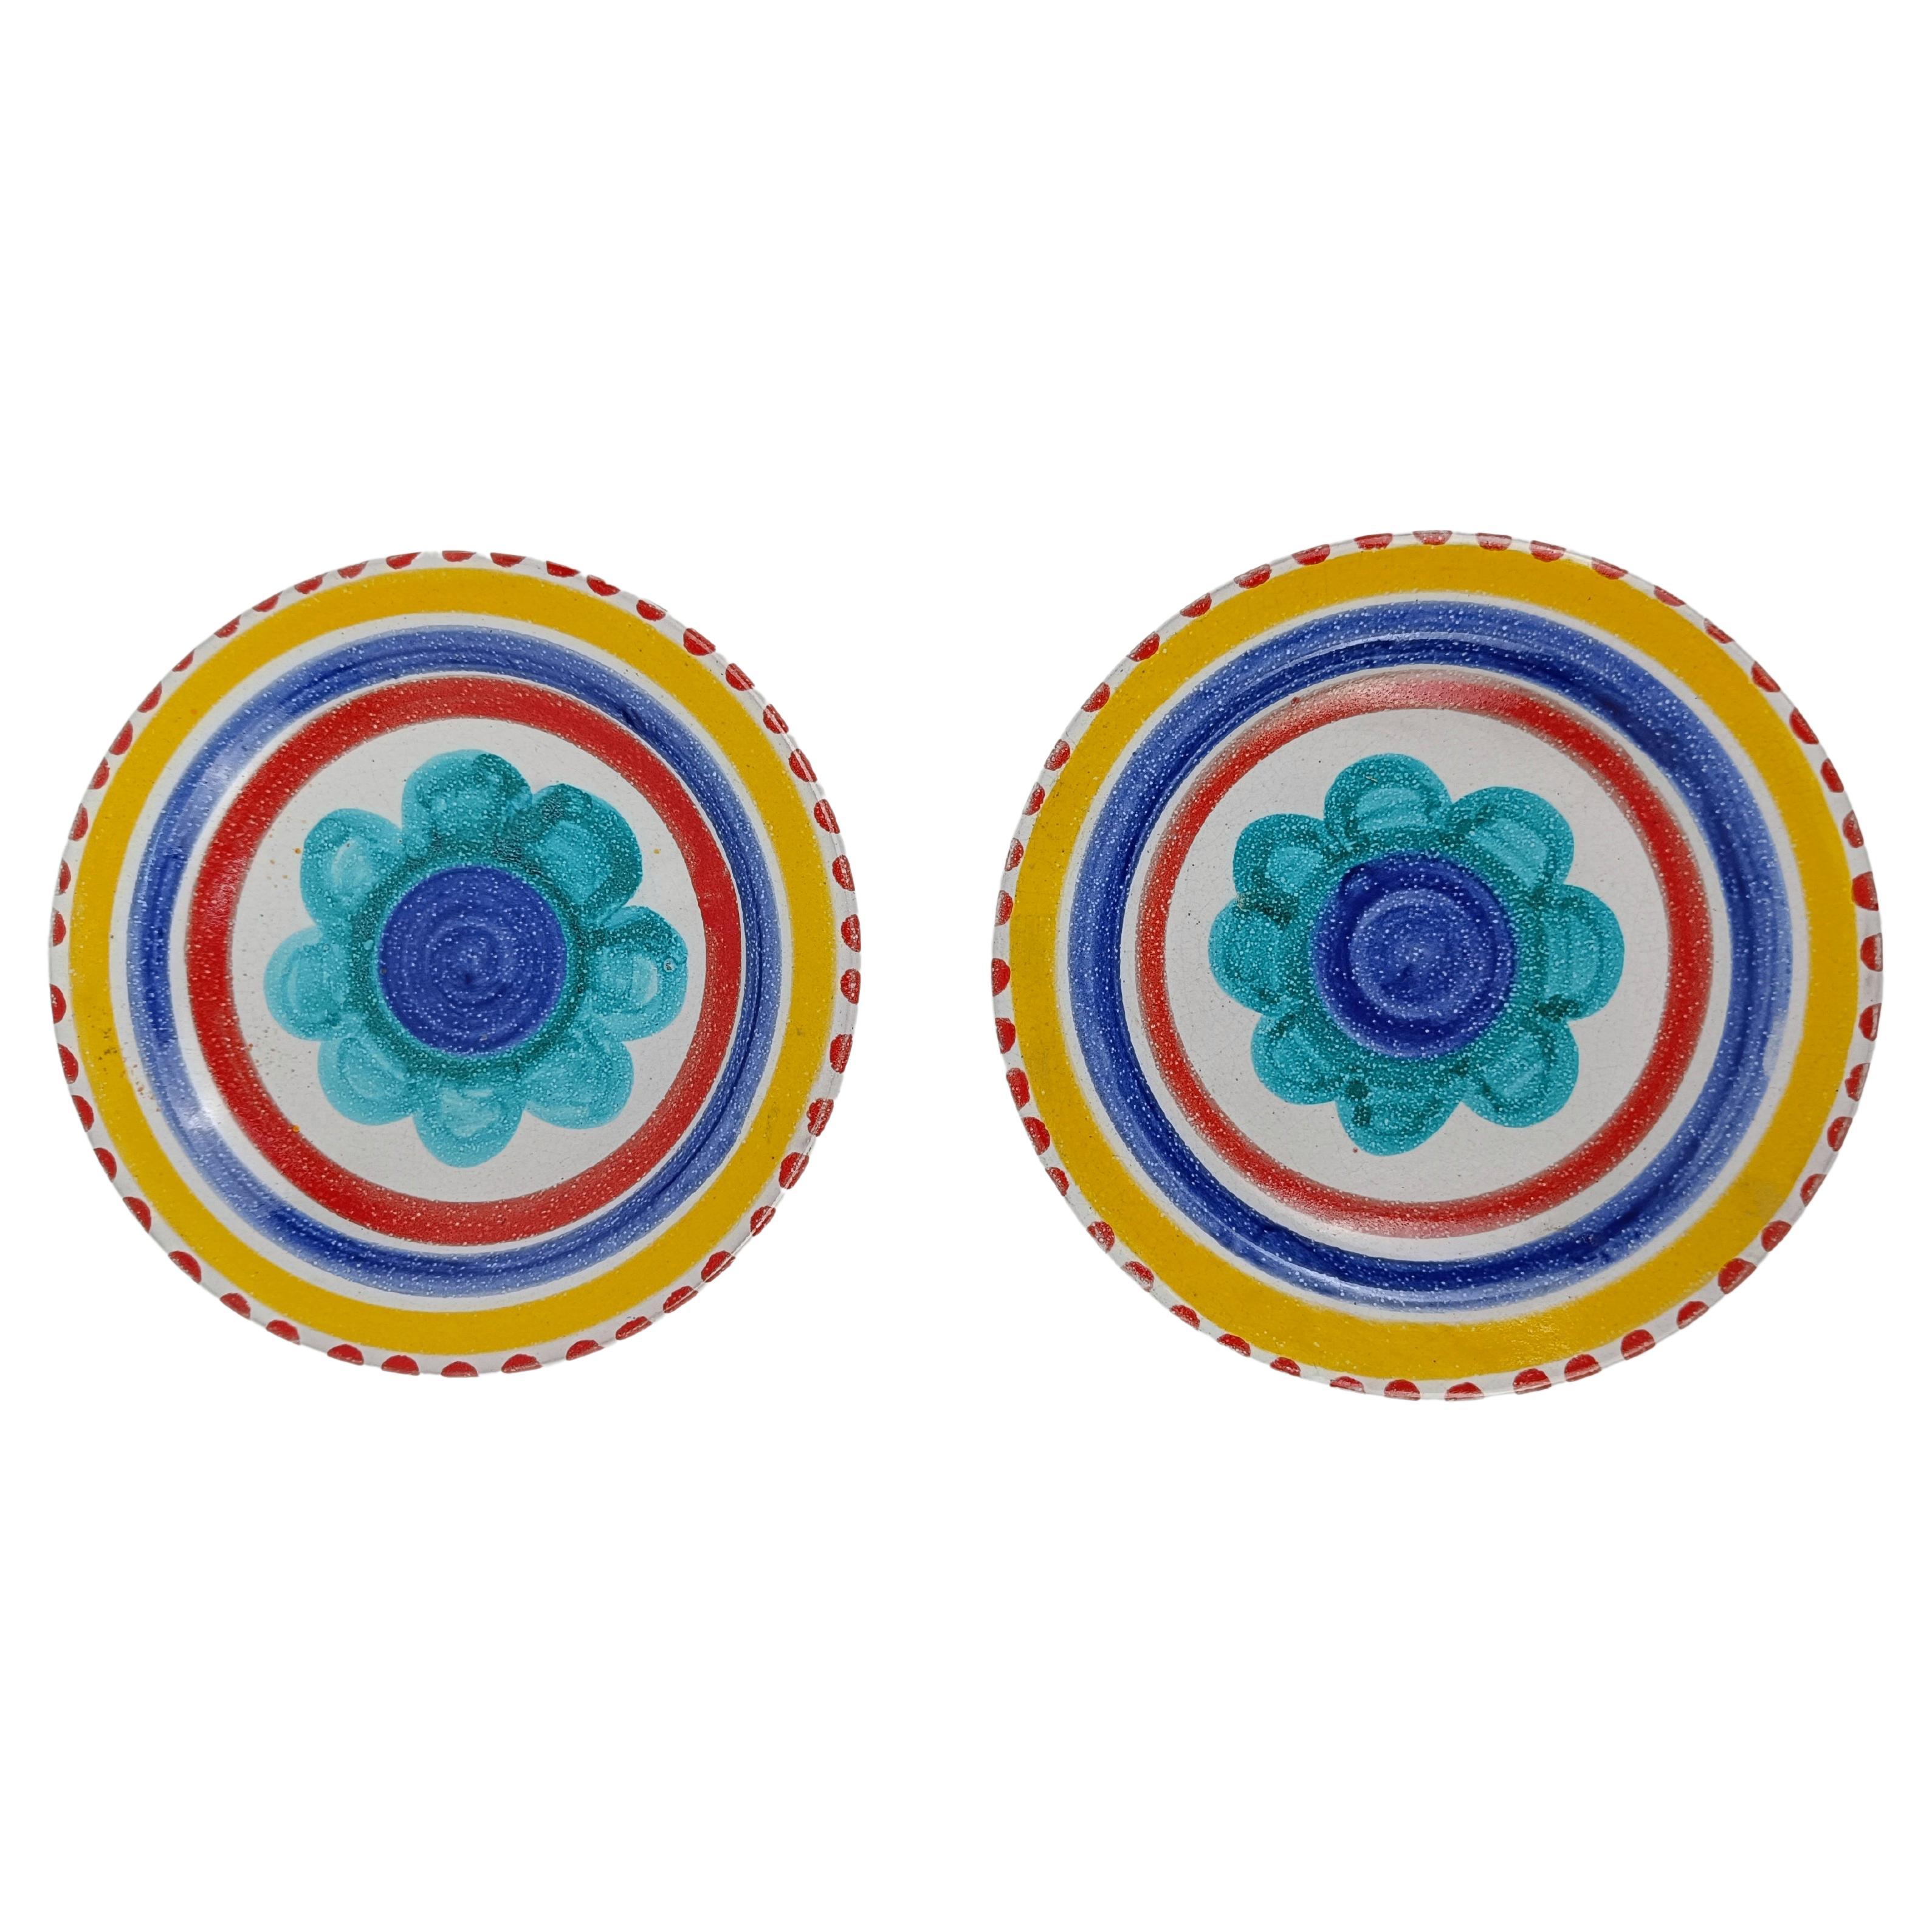 Decorative Hand Painted Italian Ceramic Plates by DeSimone, Palermo 1960s  For Sale